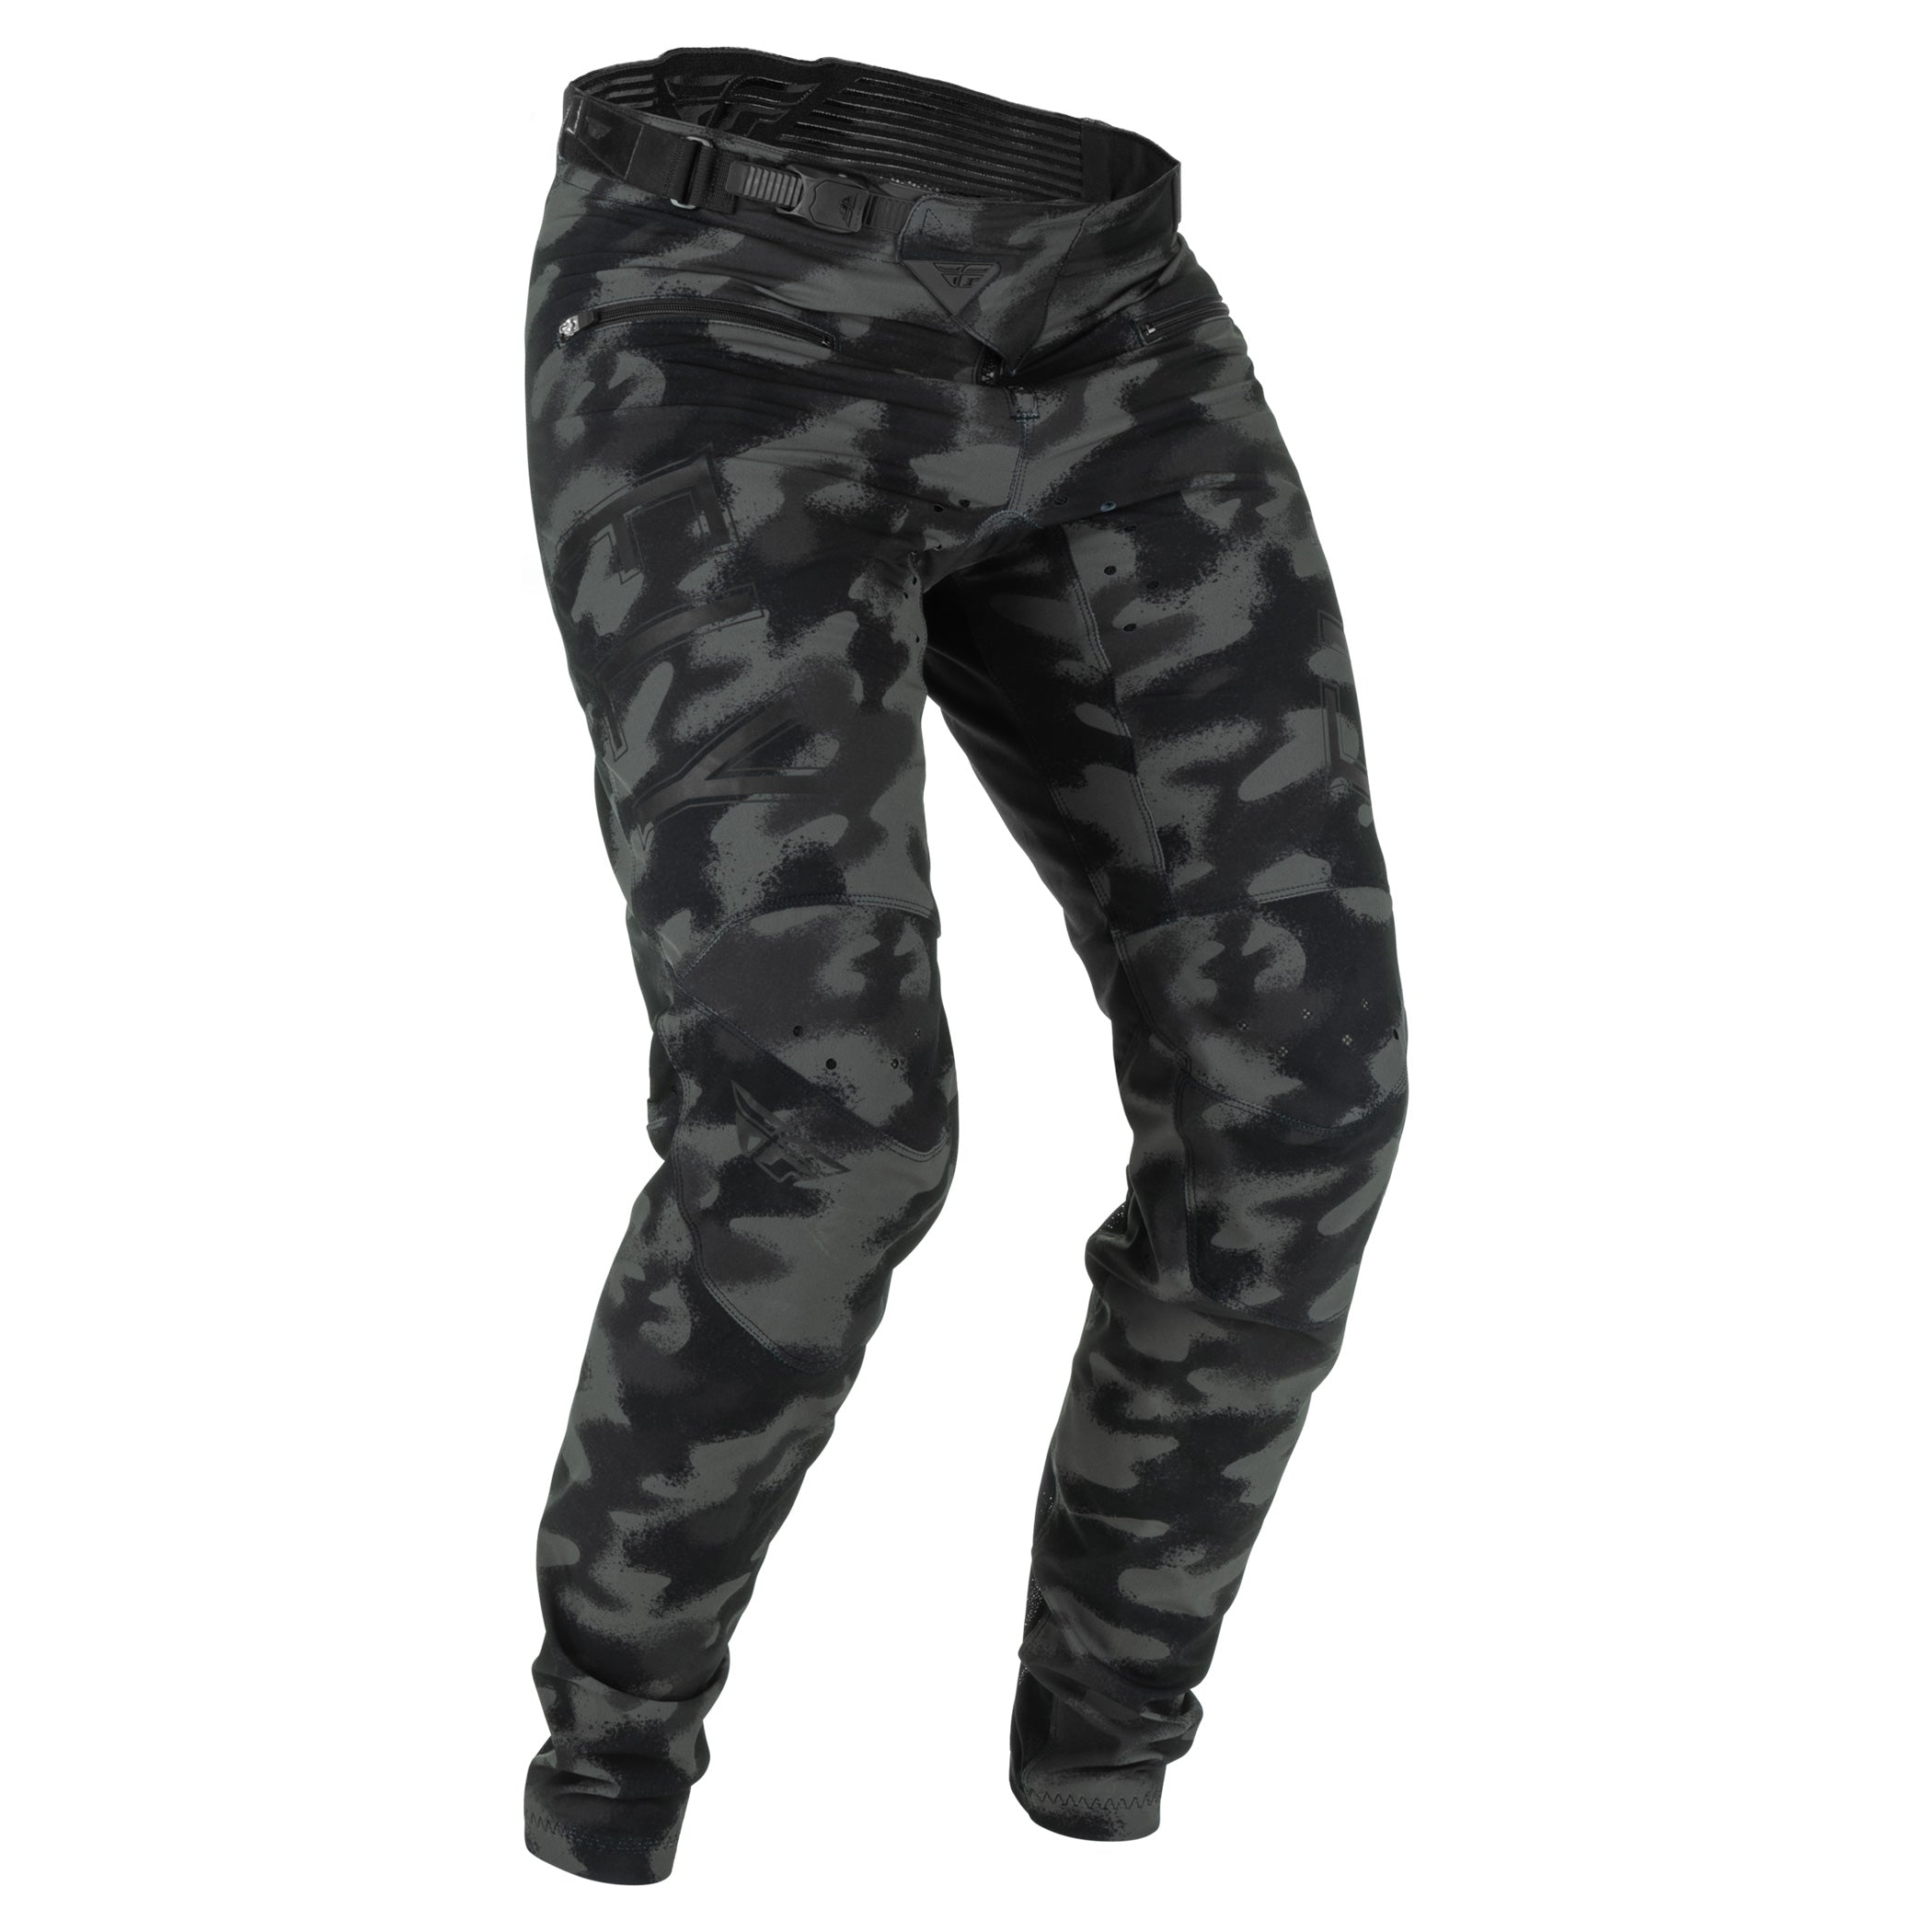 JWZUY Women's Camo Pants Cargo Trousers Cool Camouflage Pants Button Zippe  Up Elastic Waist Casual Multi Outdoor Jogger Pants with Pocket Gray XL -  Walmart.com